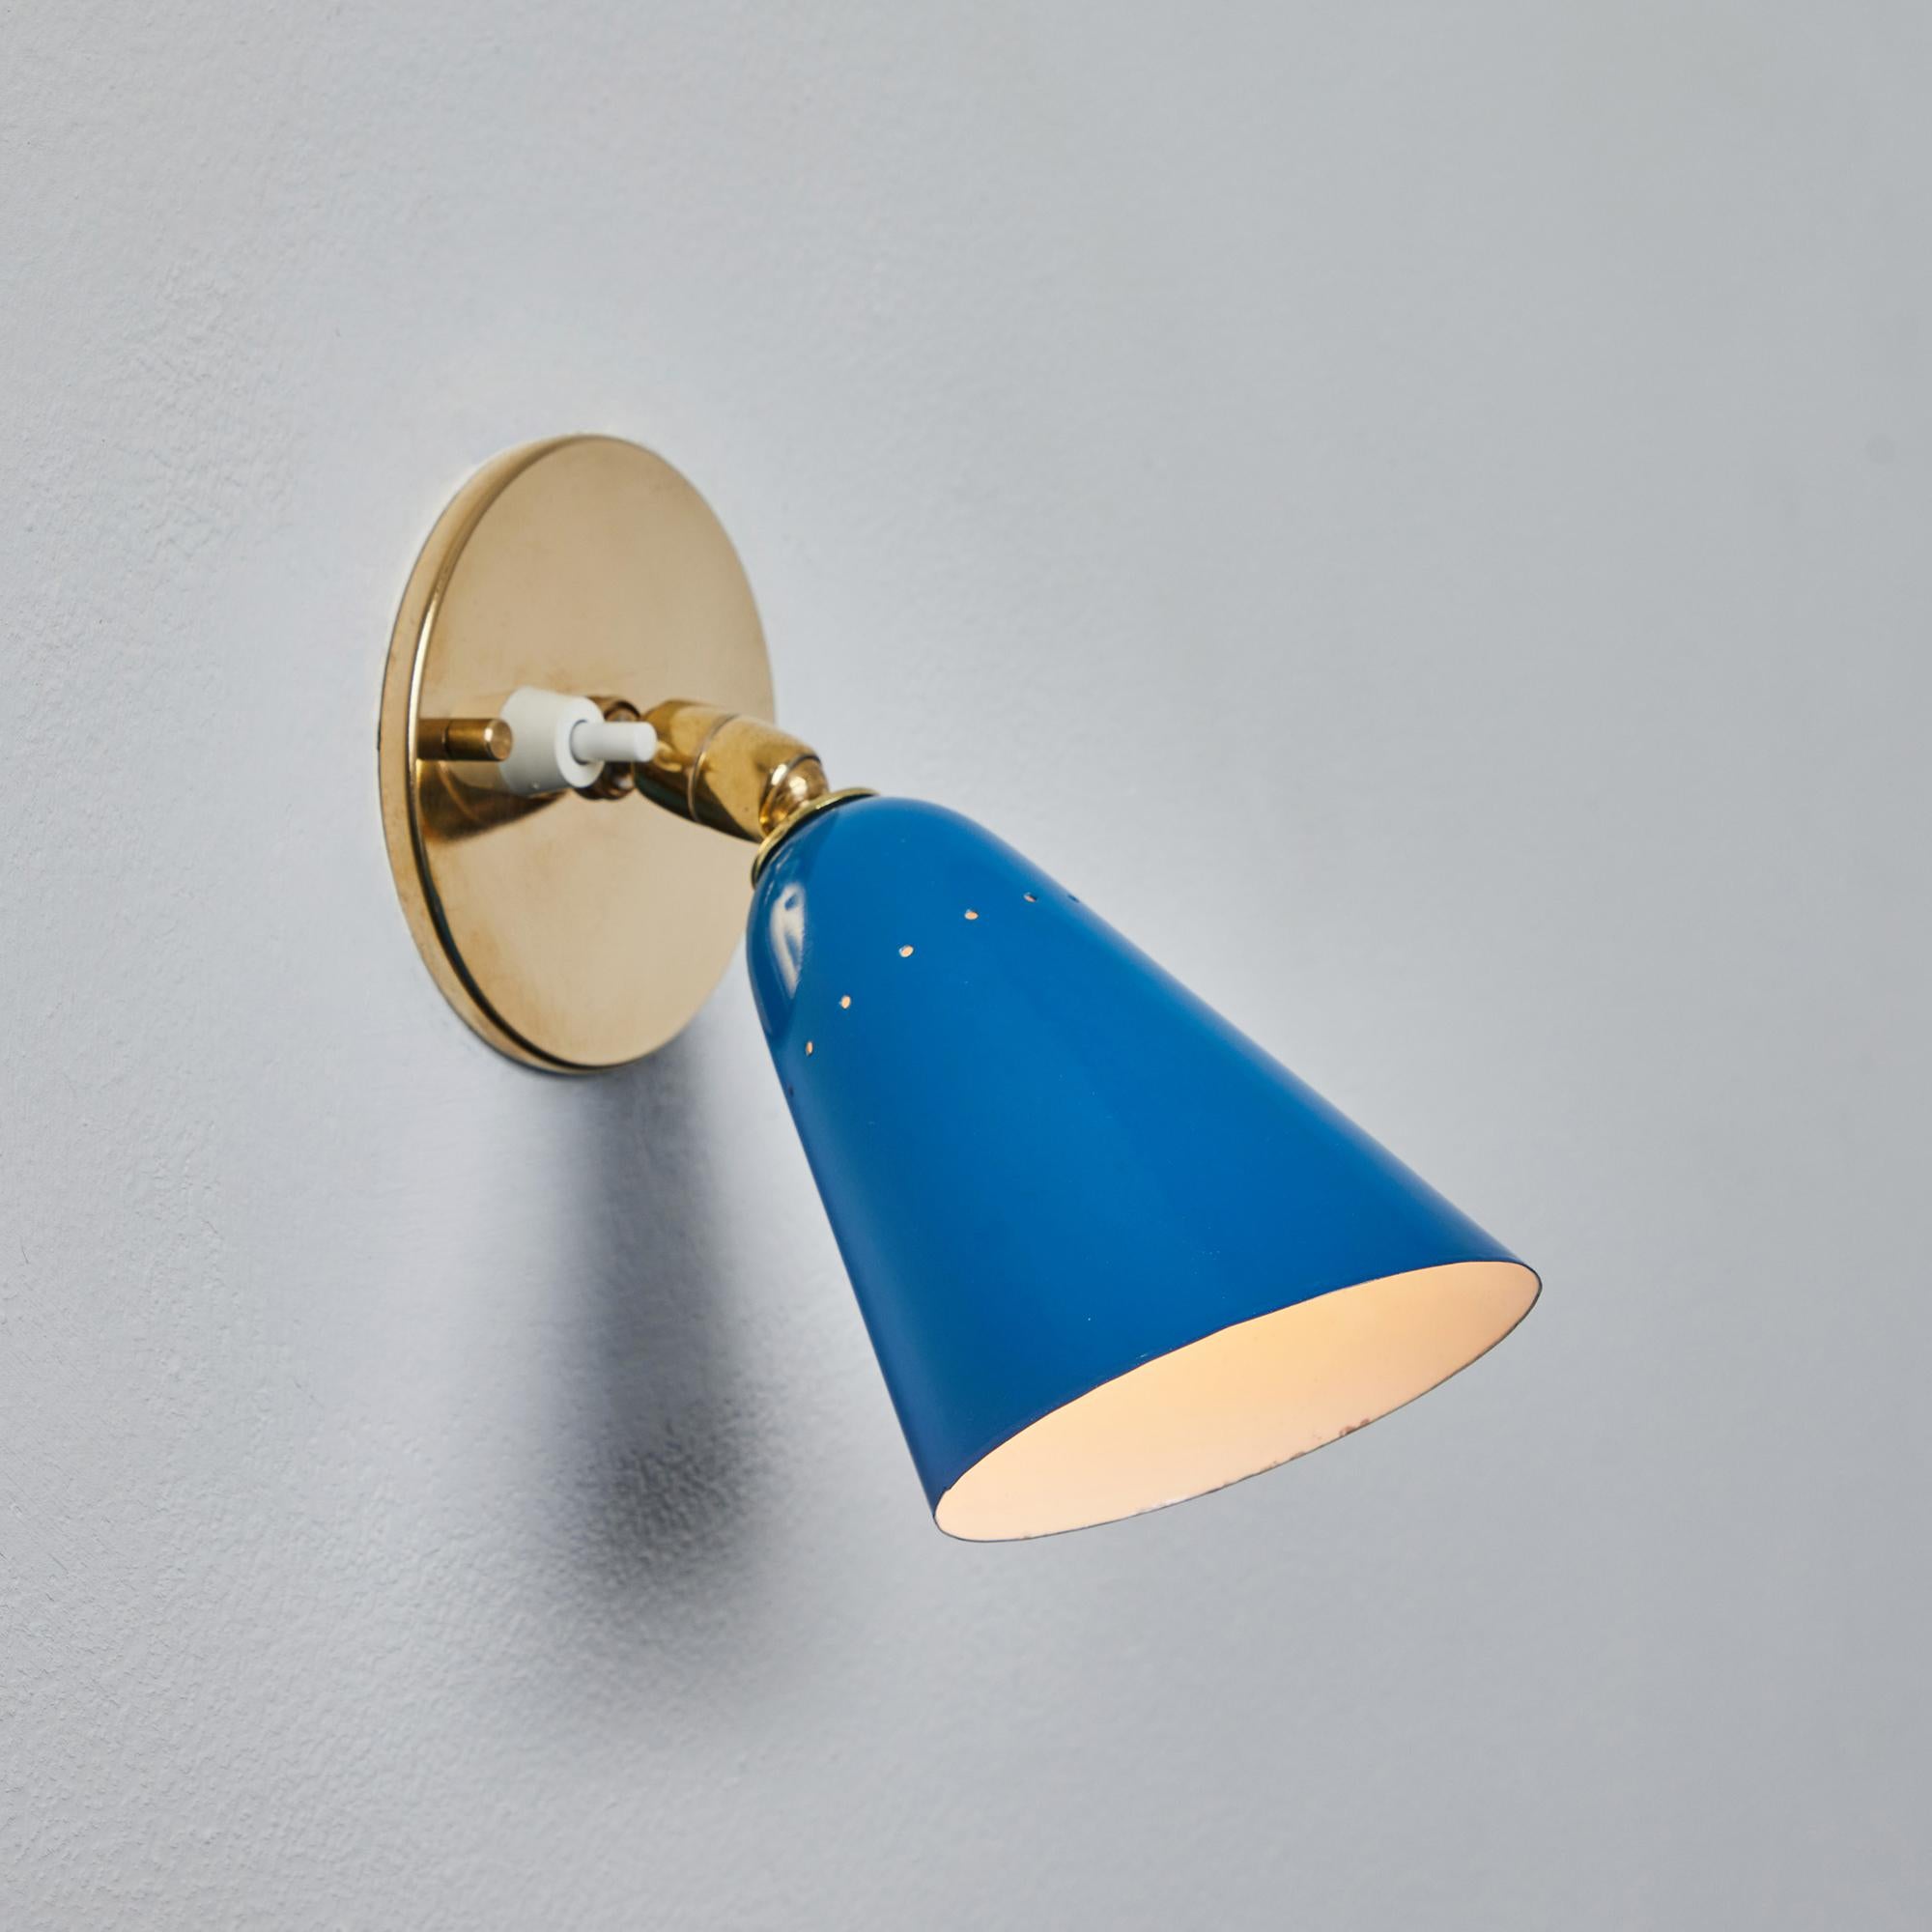 1960s Gino Sarfatti Model #26b Blue and Brass Wall Lamp for Arteluce For Sale 3